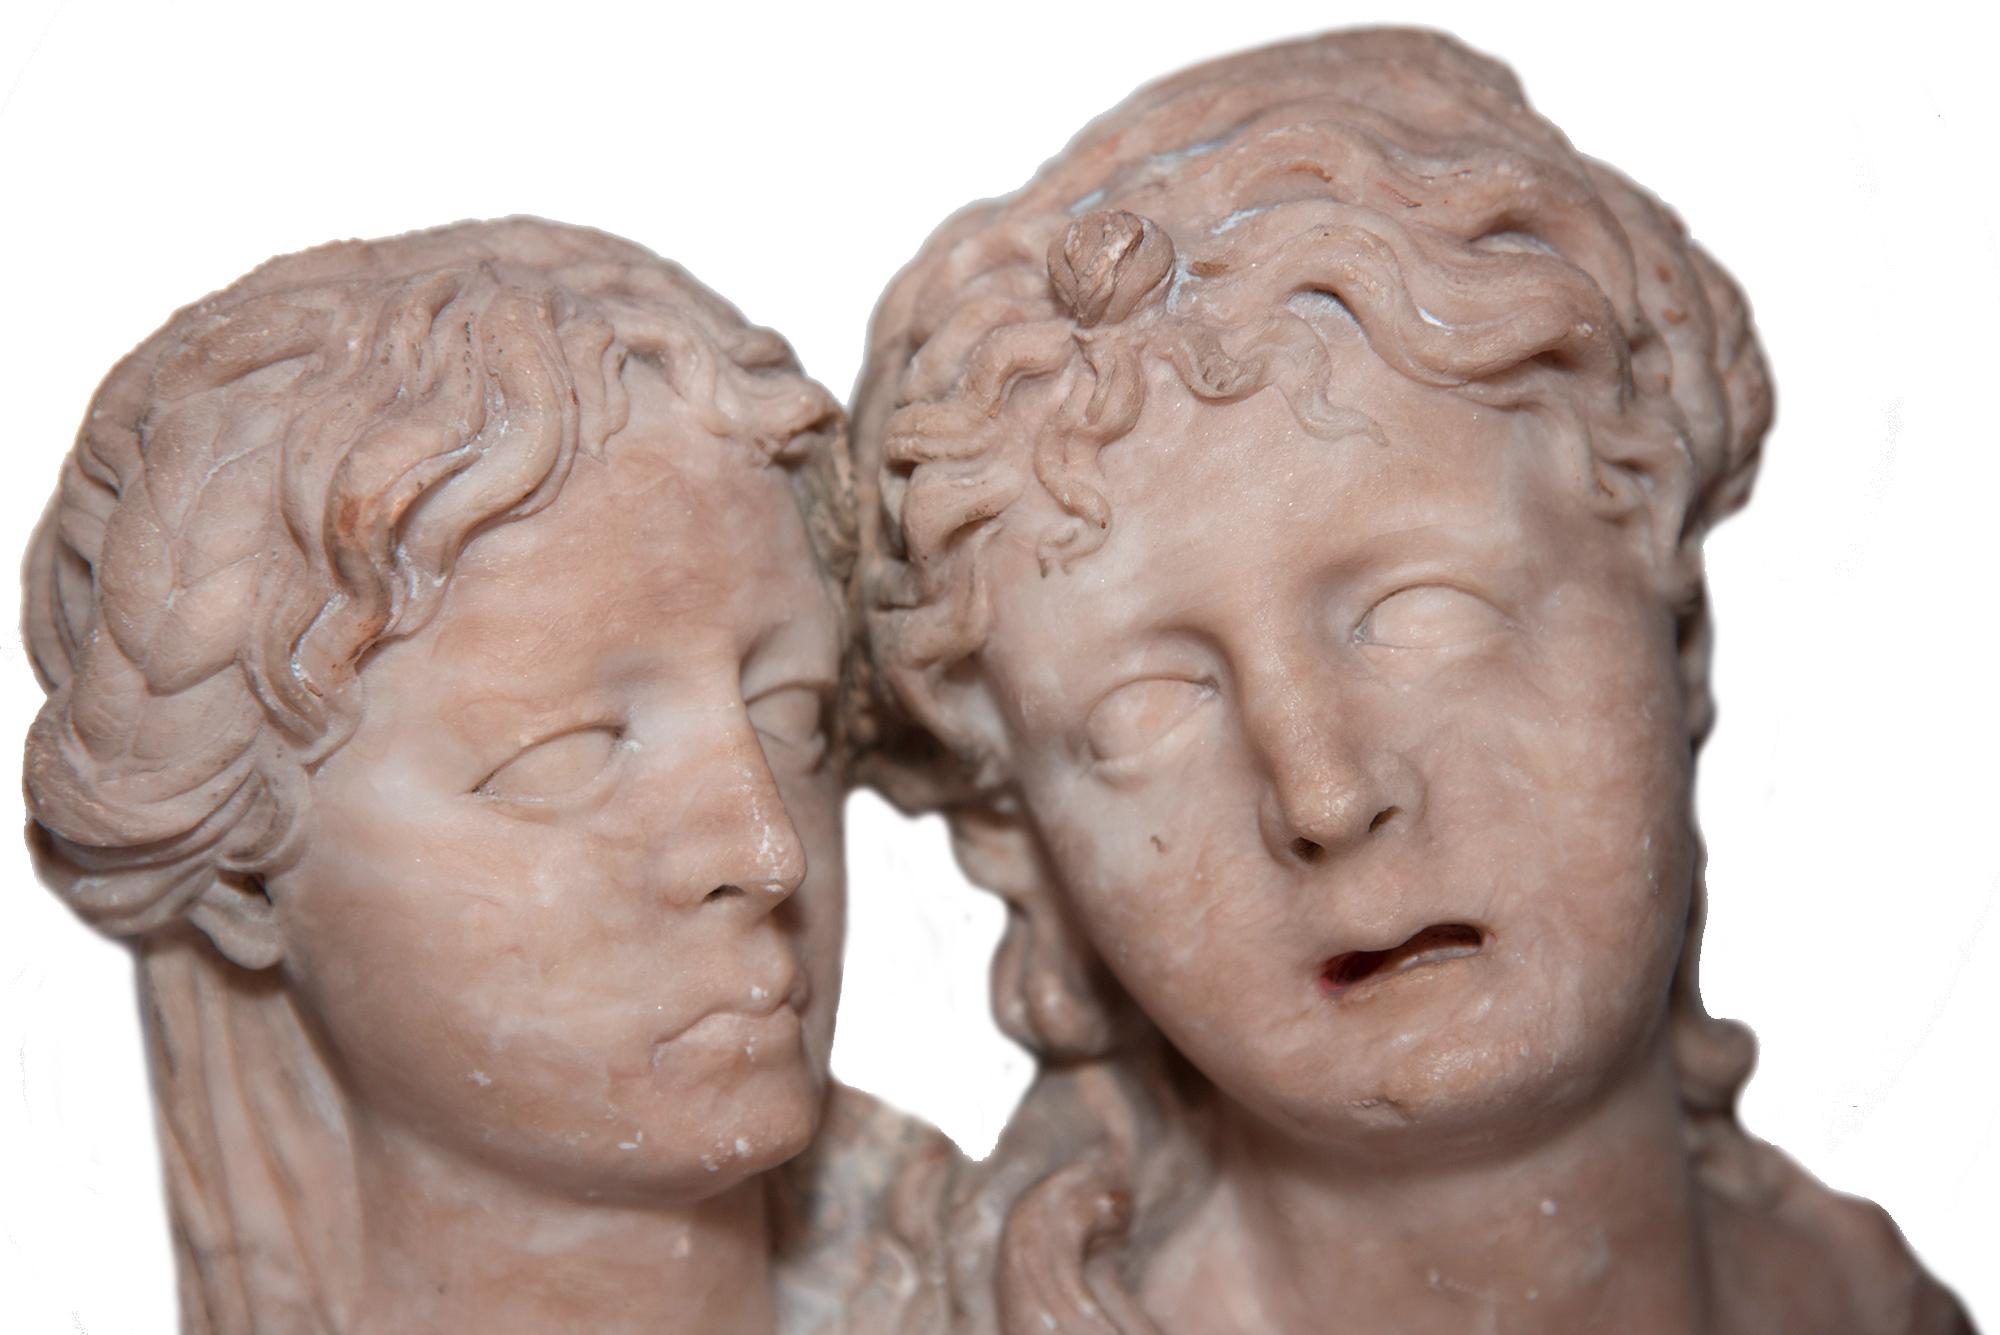 Pair of Female Busts In Alabaster, Southern Netherlands Circa 1550 - Northern Renaissance Sculpture by Unknown